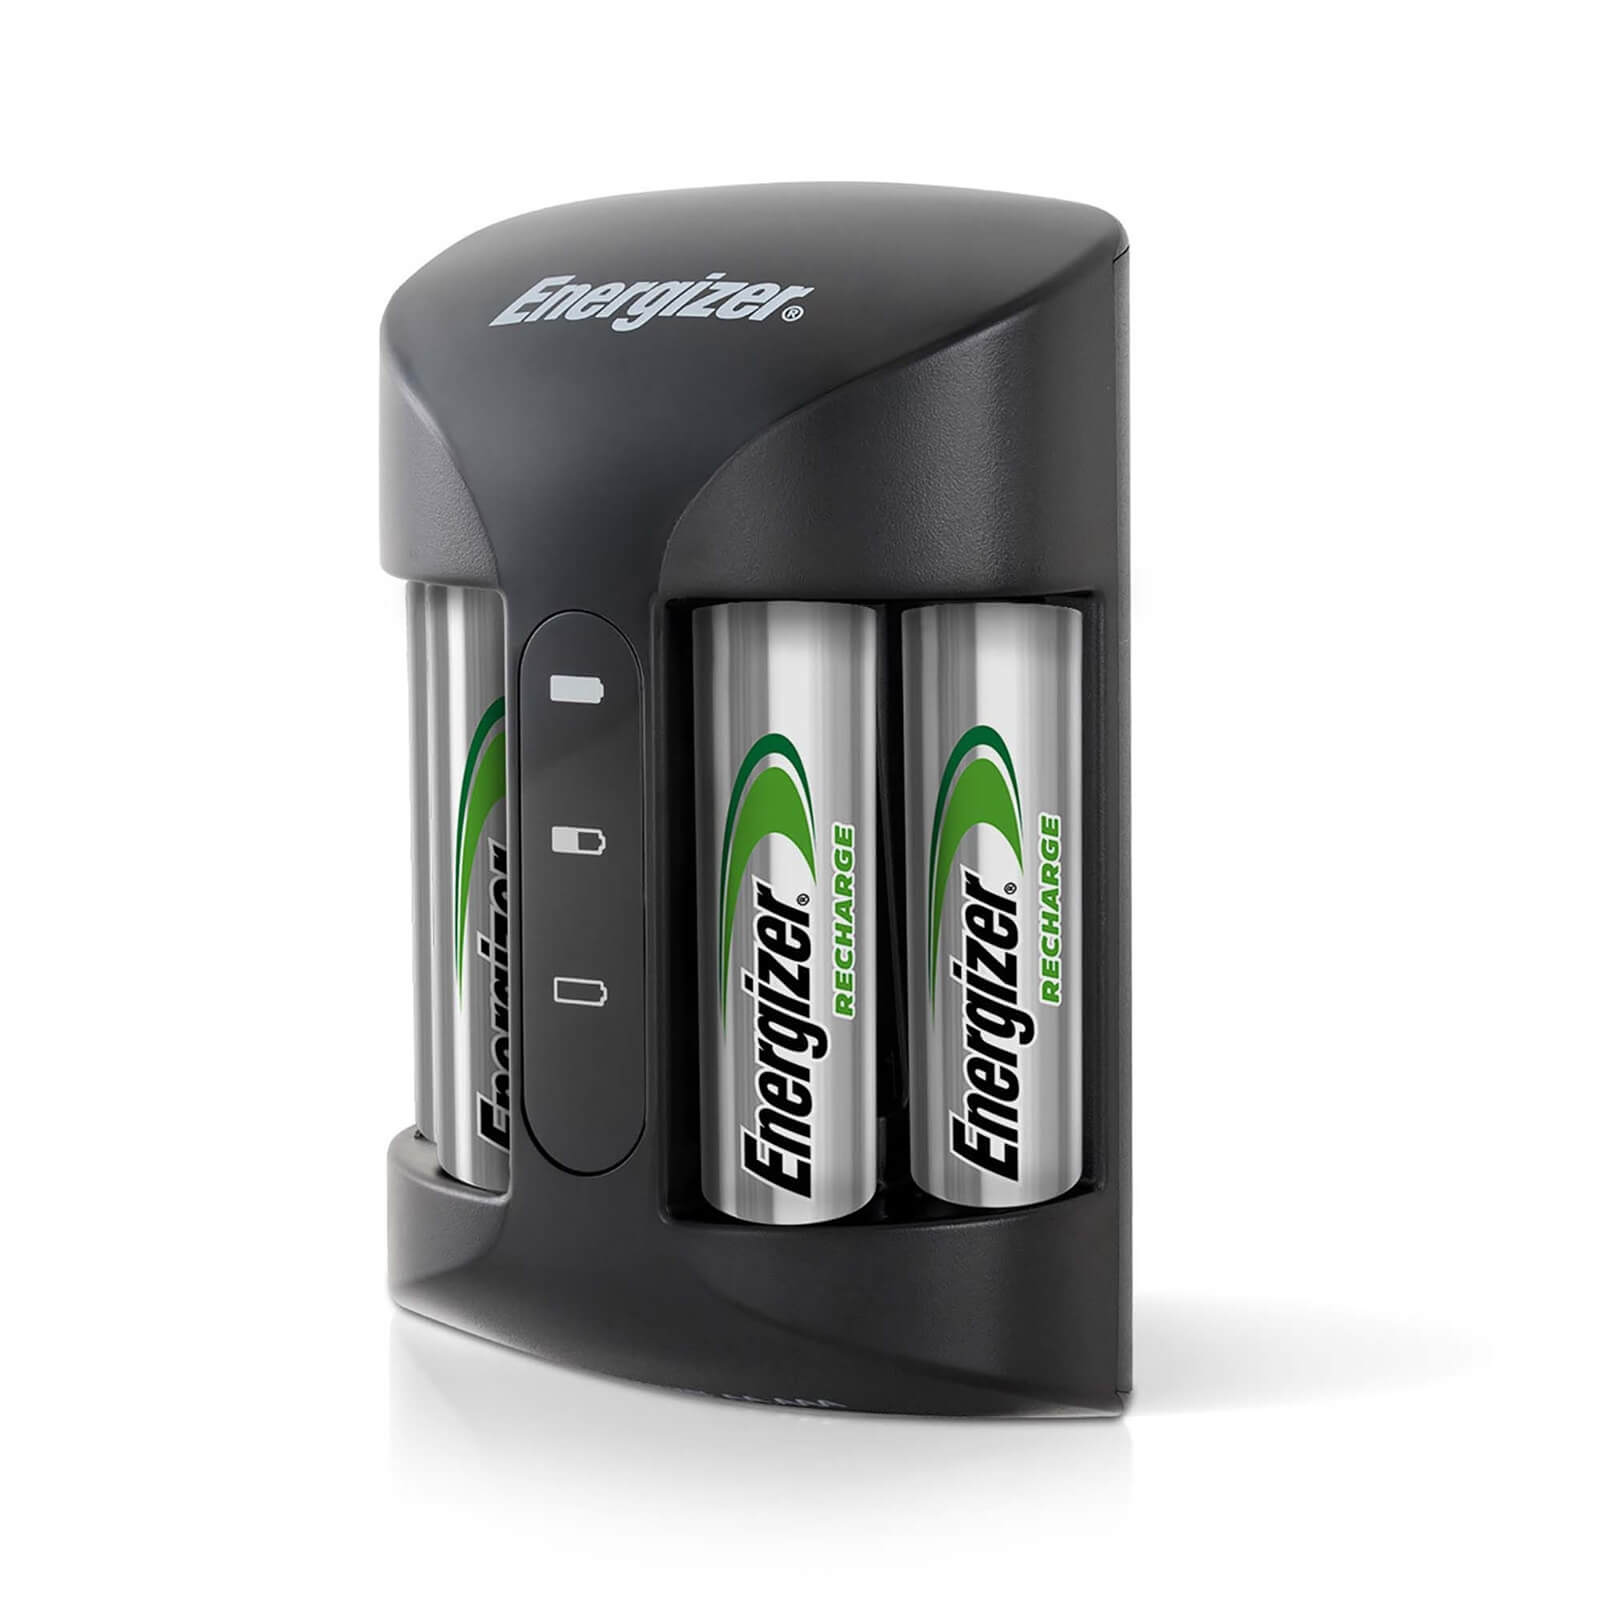 Energizer NiMH Recharge Pro Battery Charger